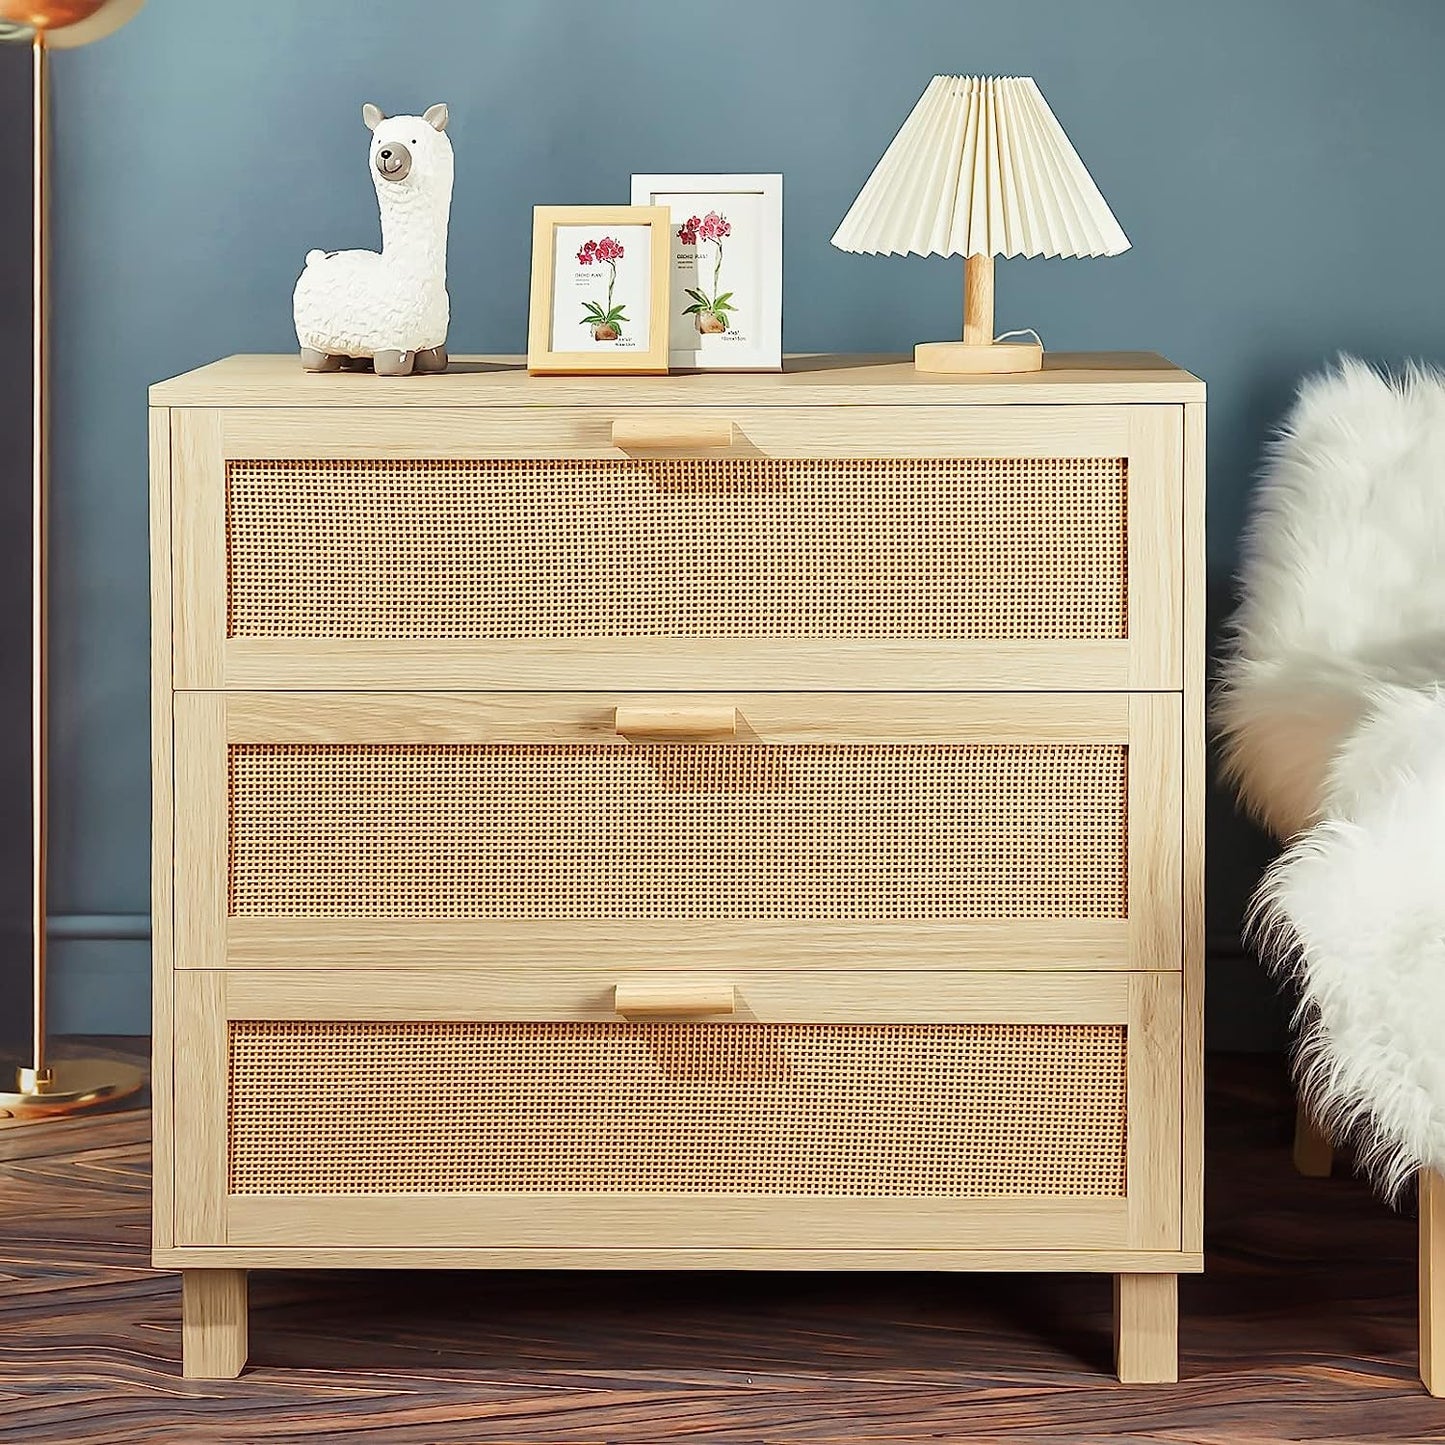 Rattan Dresser, Rattan Chest of Drawers, Closet Storage Oak Drawer Chest for Bedroom, 2 to 6 Rattan Drawers, Rattan Dresser for Bedroom